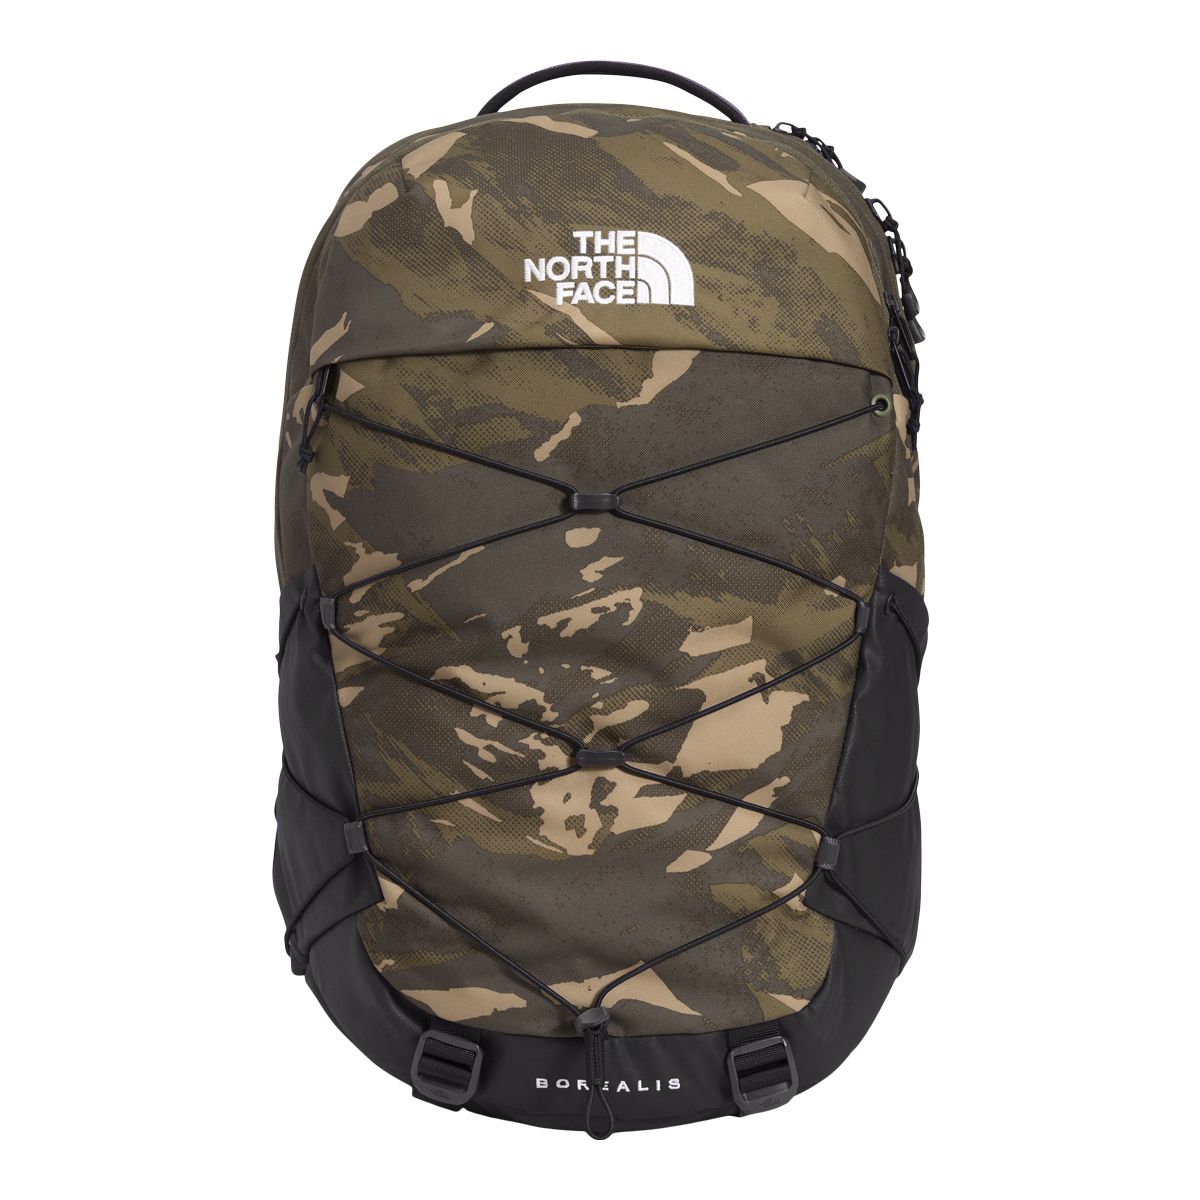 The North Face Borealis 28L Backpack | Atmosphere